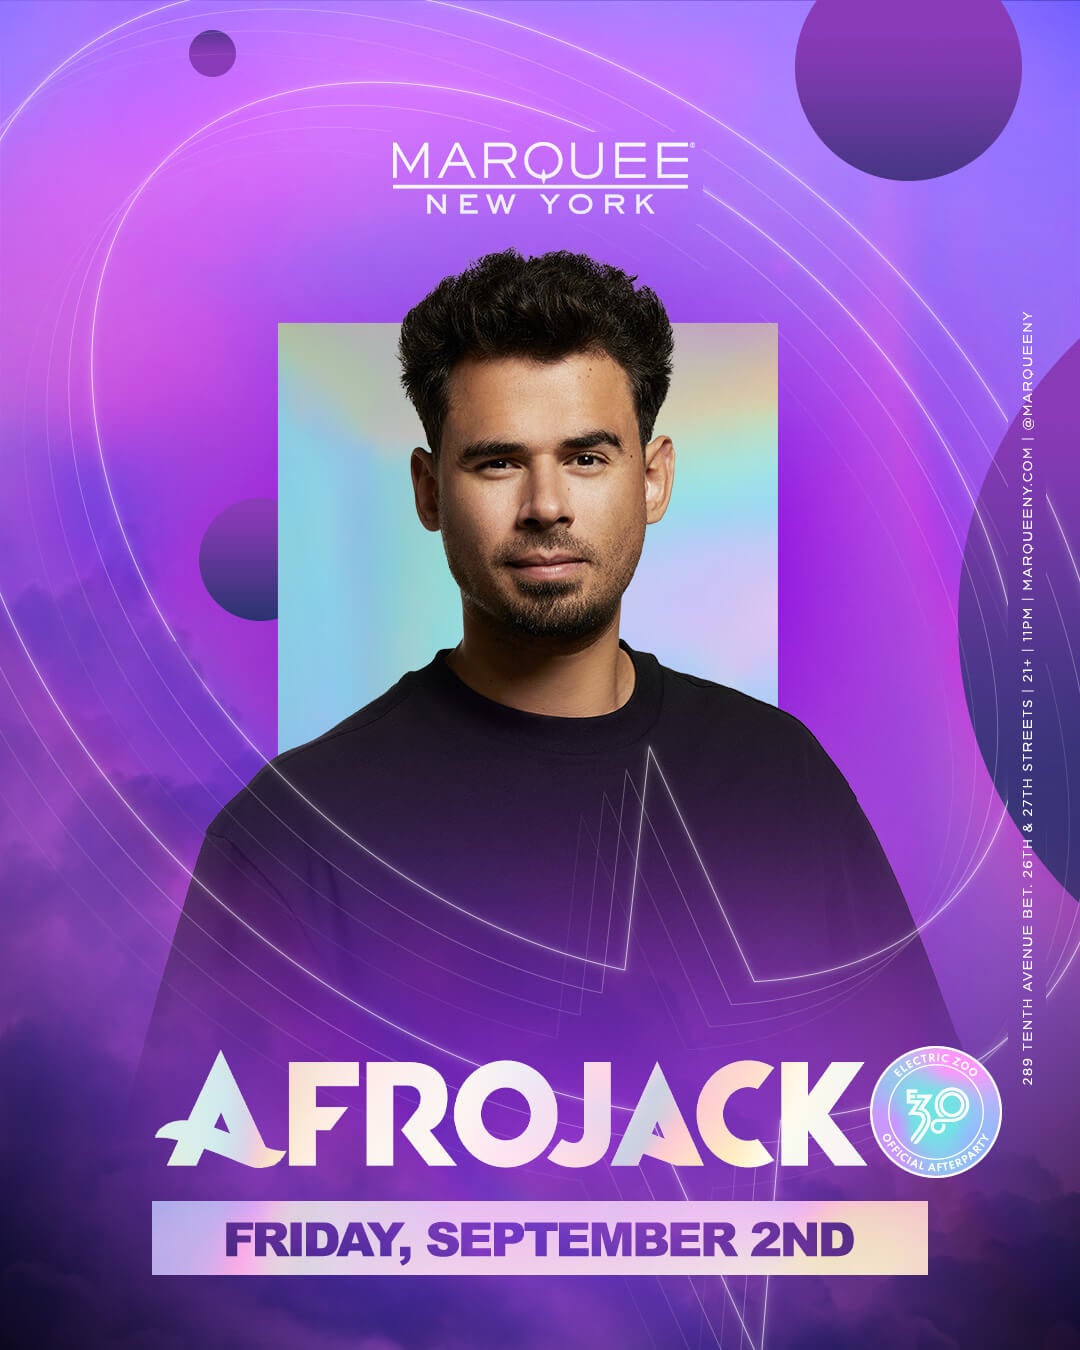 9/2/22 – Afrojack – Marquee New York